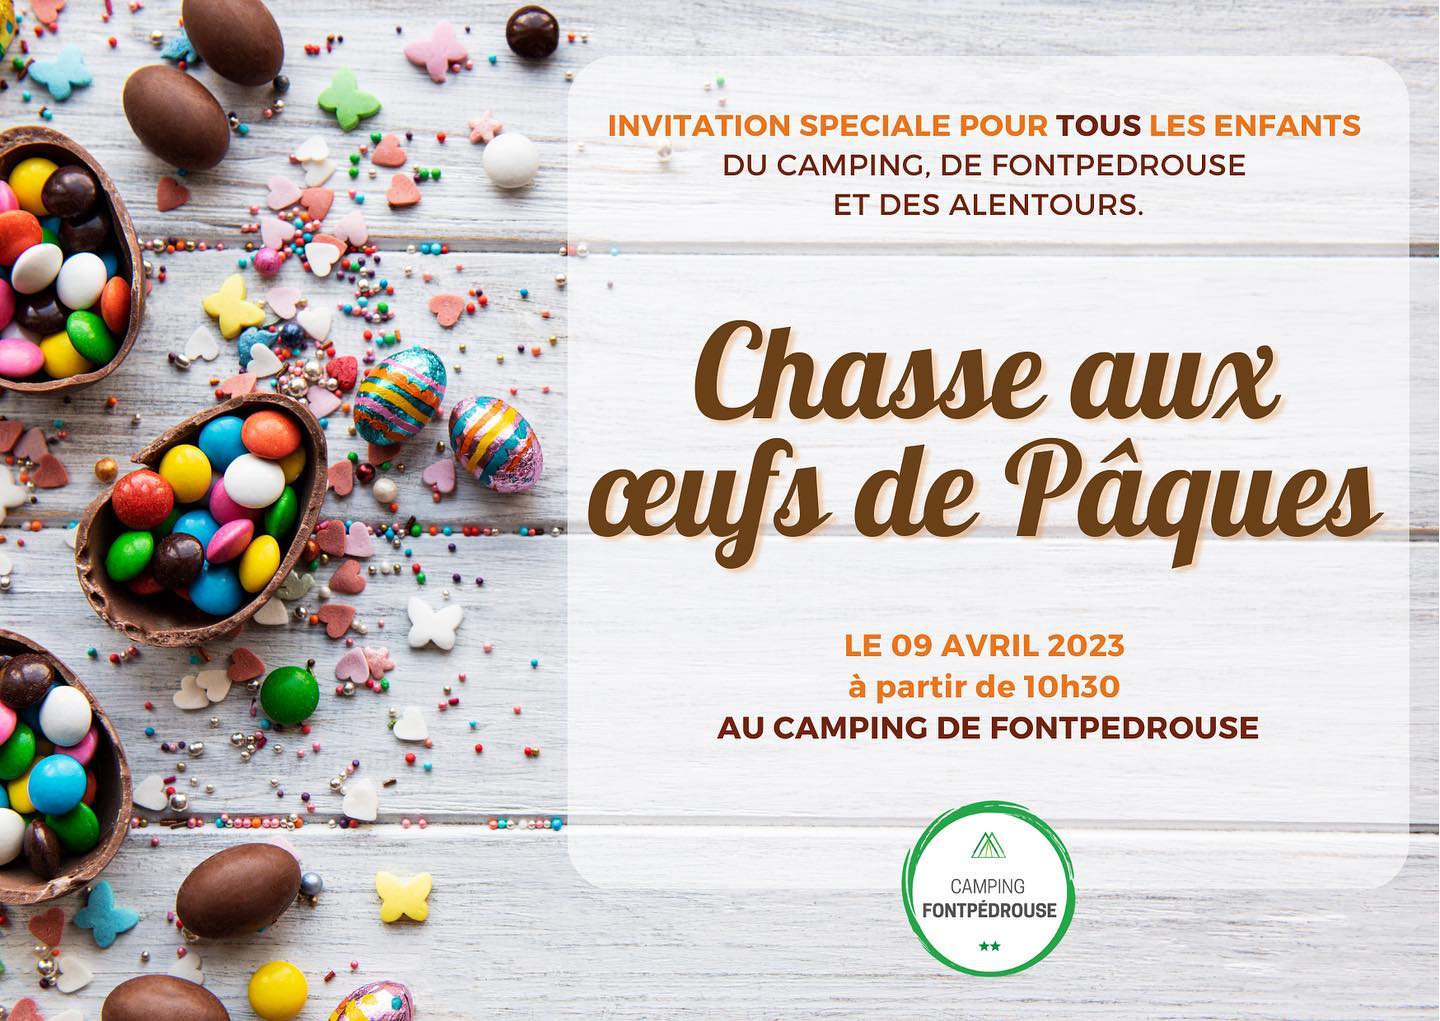 chasse aux oeufs camping fontpedrouse 9 avril-CAMPING fONTPRDROUSE